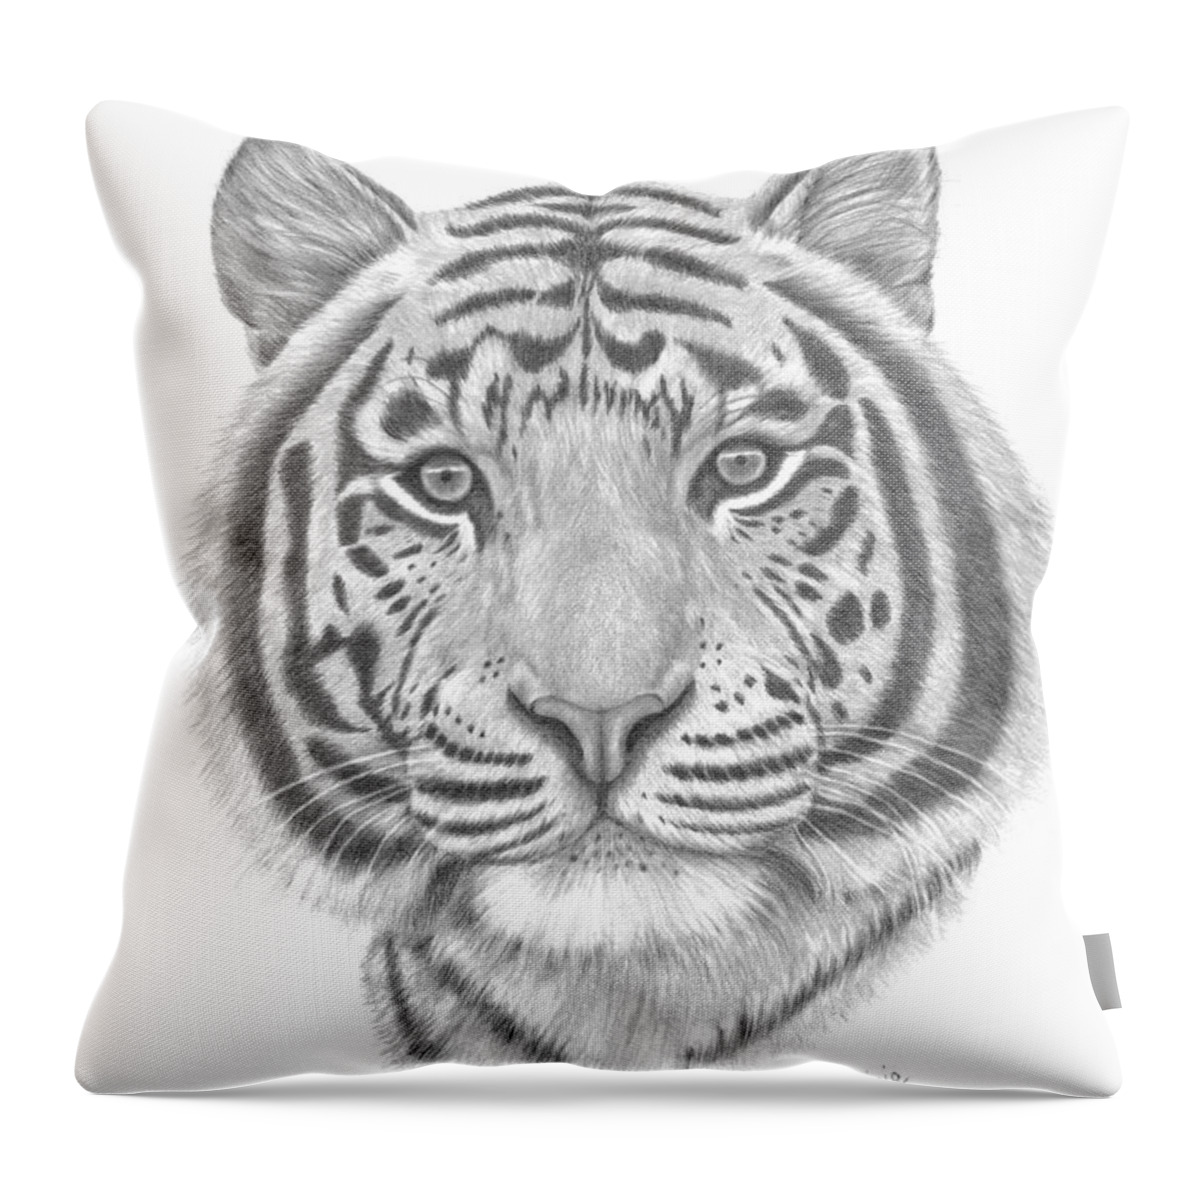 Tiger Throw Pillow featuring the drawing White Tiger by Patricia Hiltz